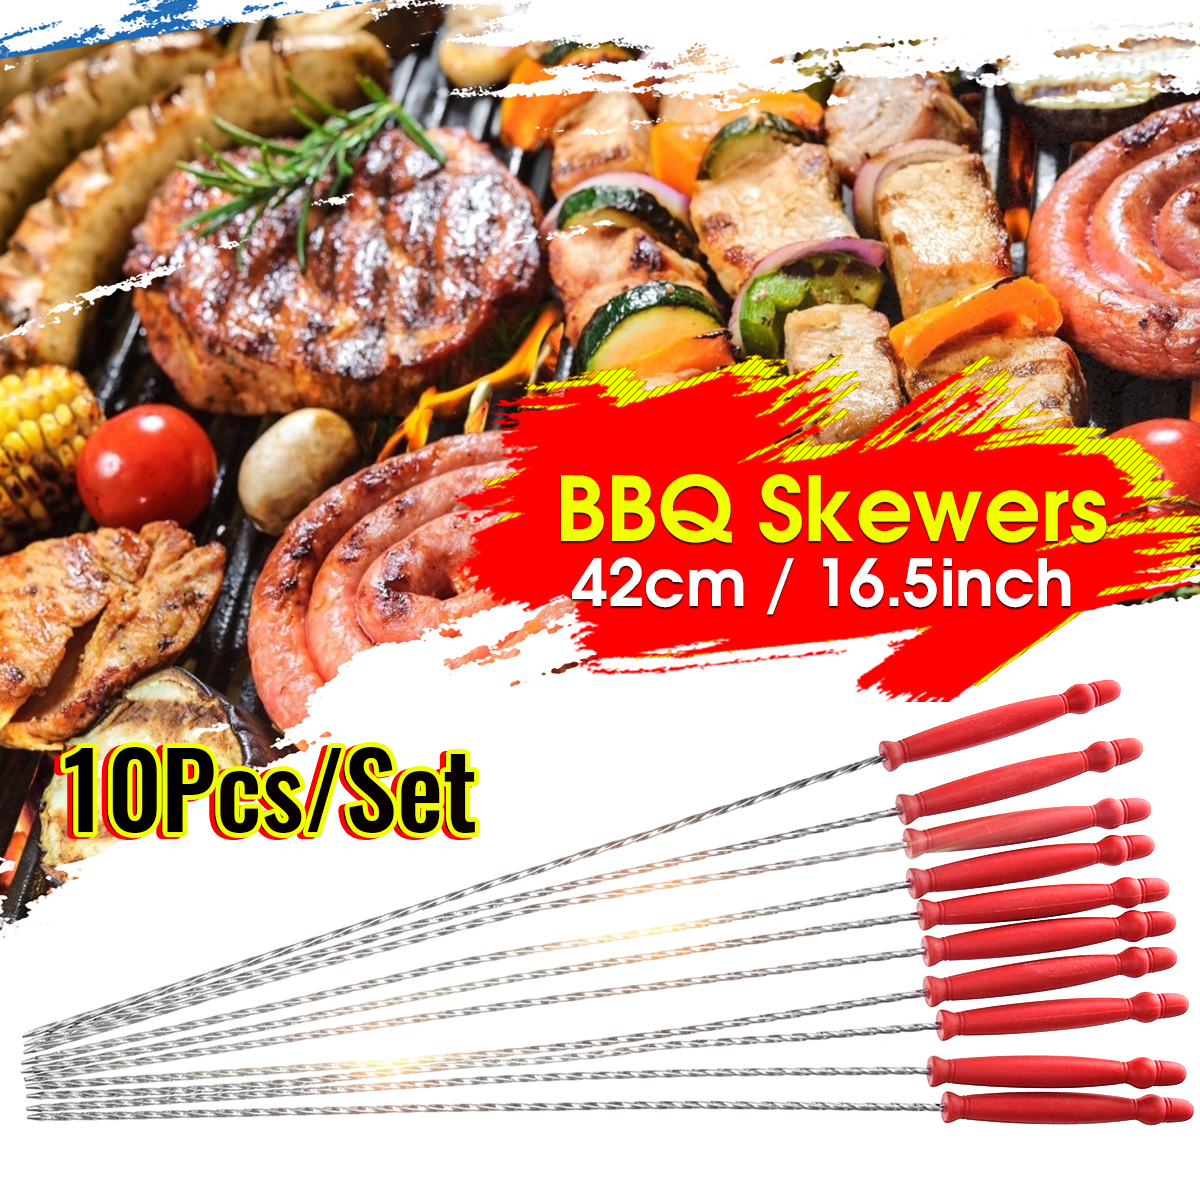 10PcsSet-Barbecue-Skewers-Party-BBQ-Kebab-Meat-Stick-Grilling-Picnic-165quot-Long-1758248-1